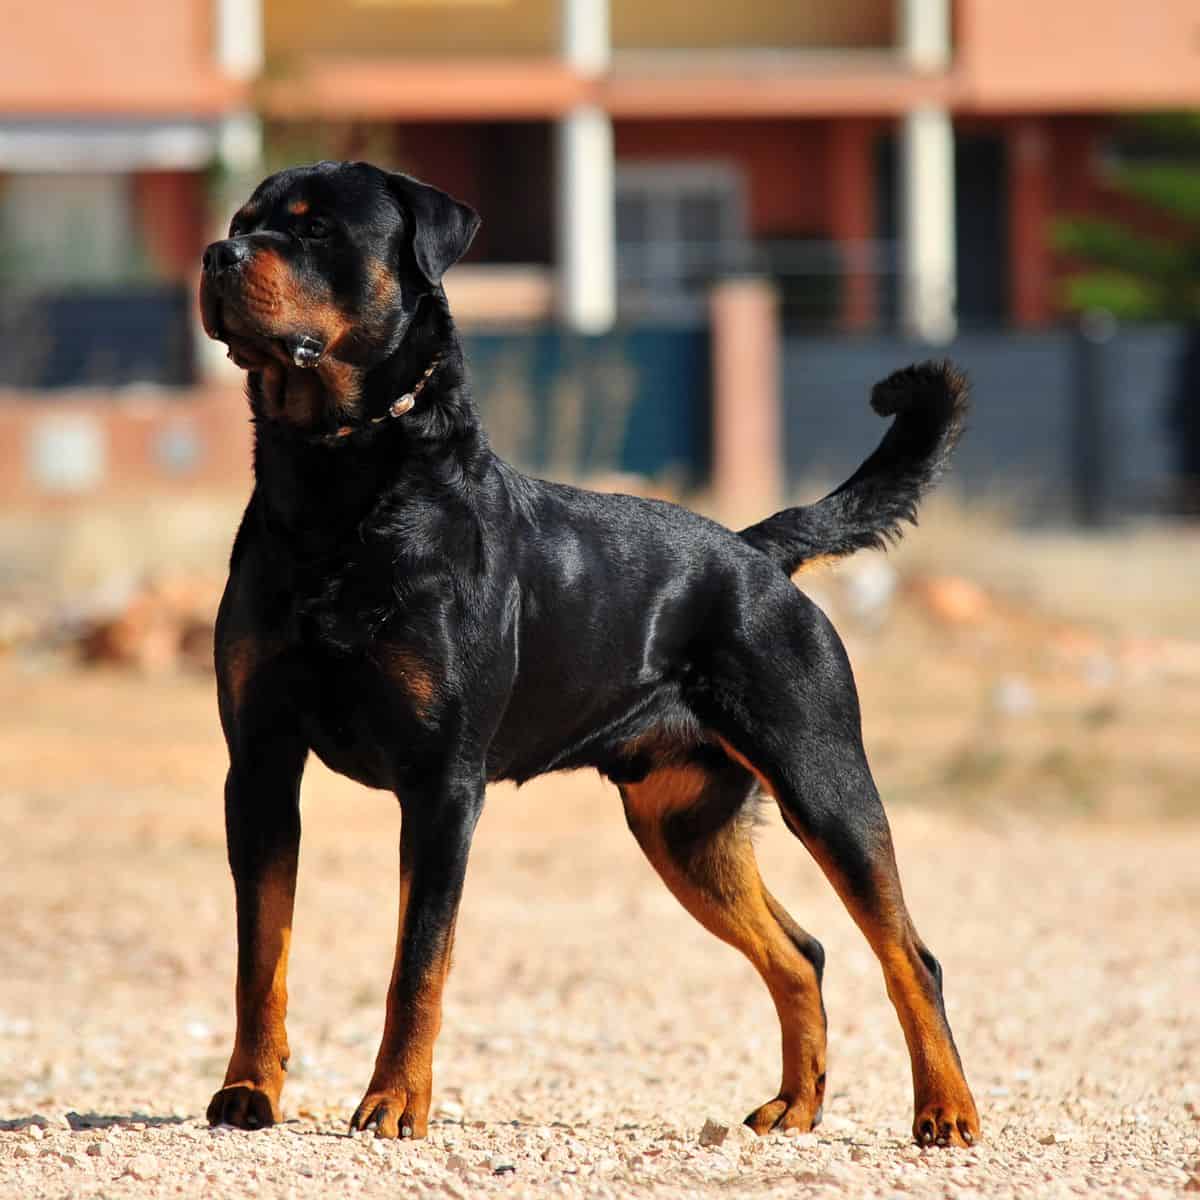 American Rottweiler vs. German Rottweiler: The 1 Major Difference